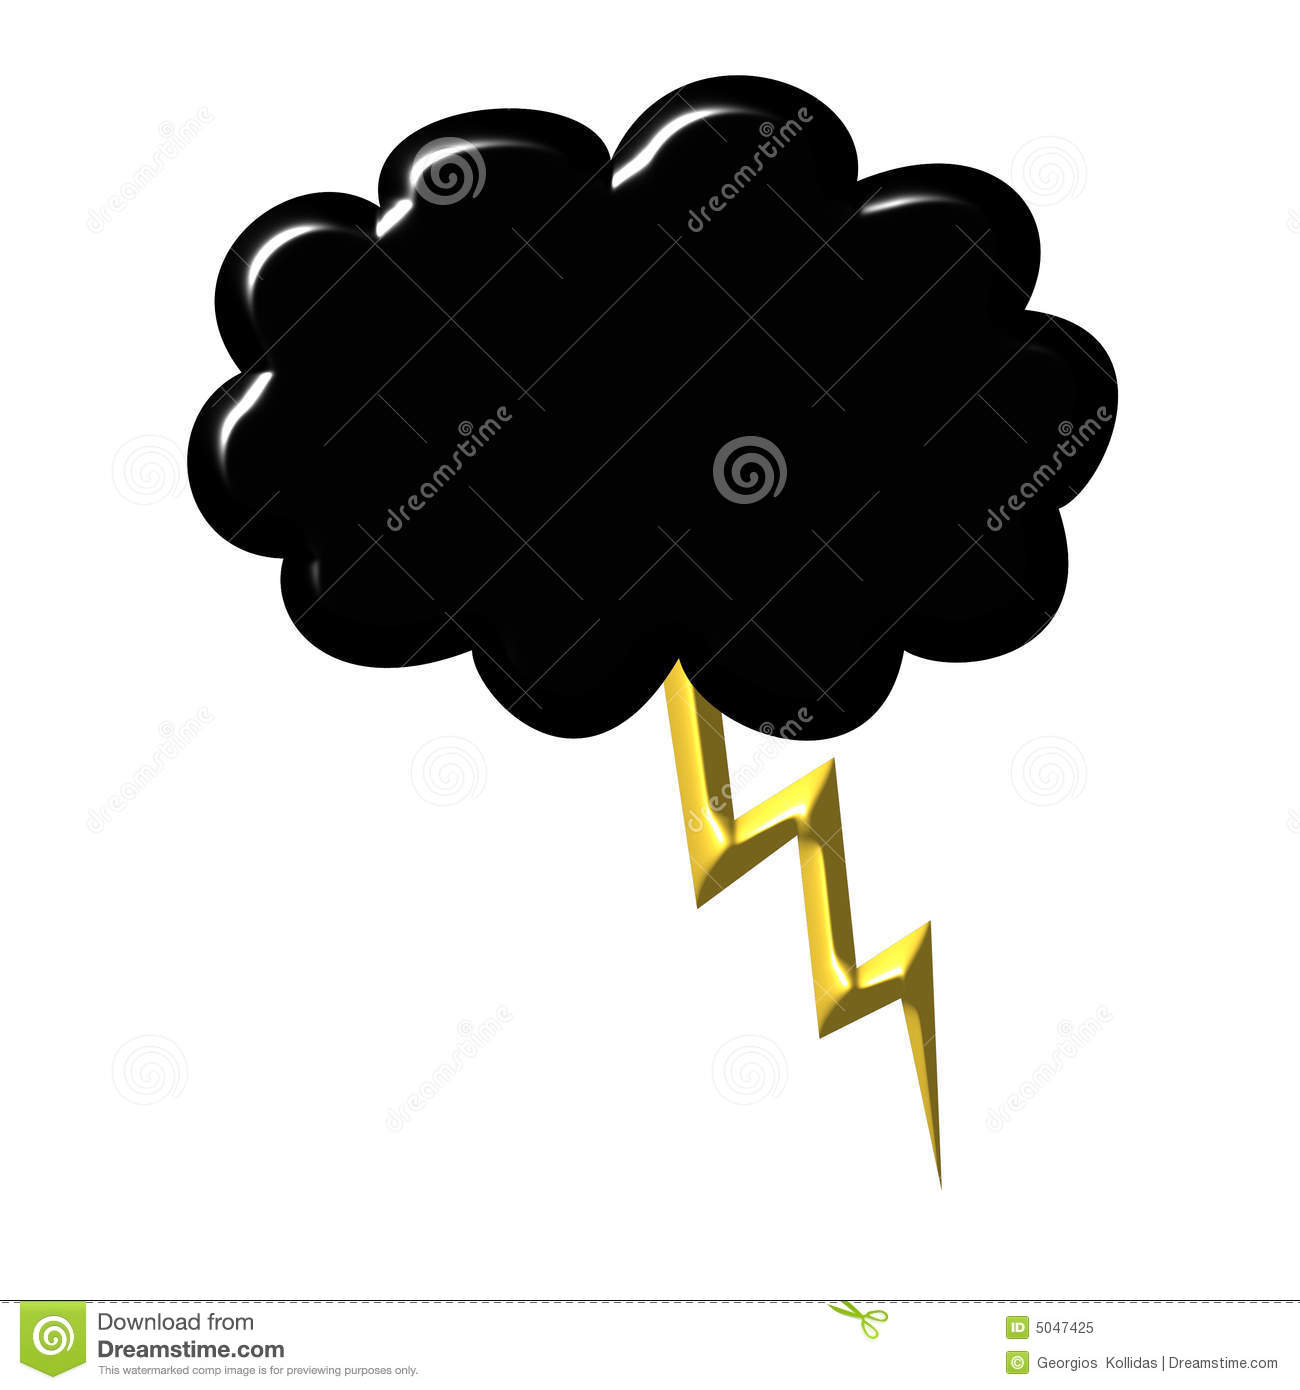 Black Cloud With Thunder Royalty Free Stock Photo   Image  5047425